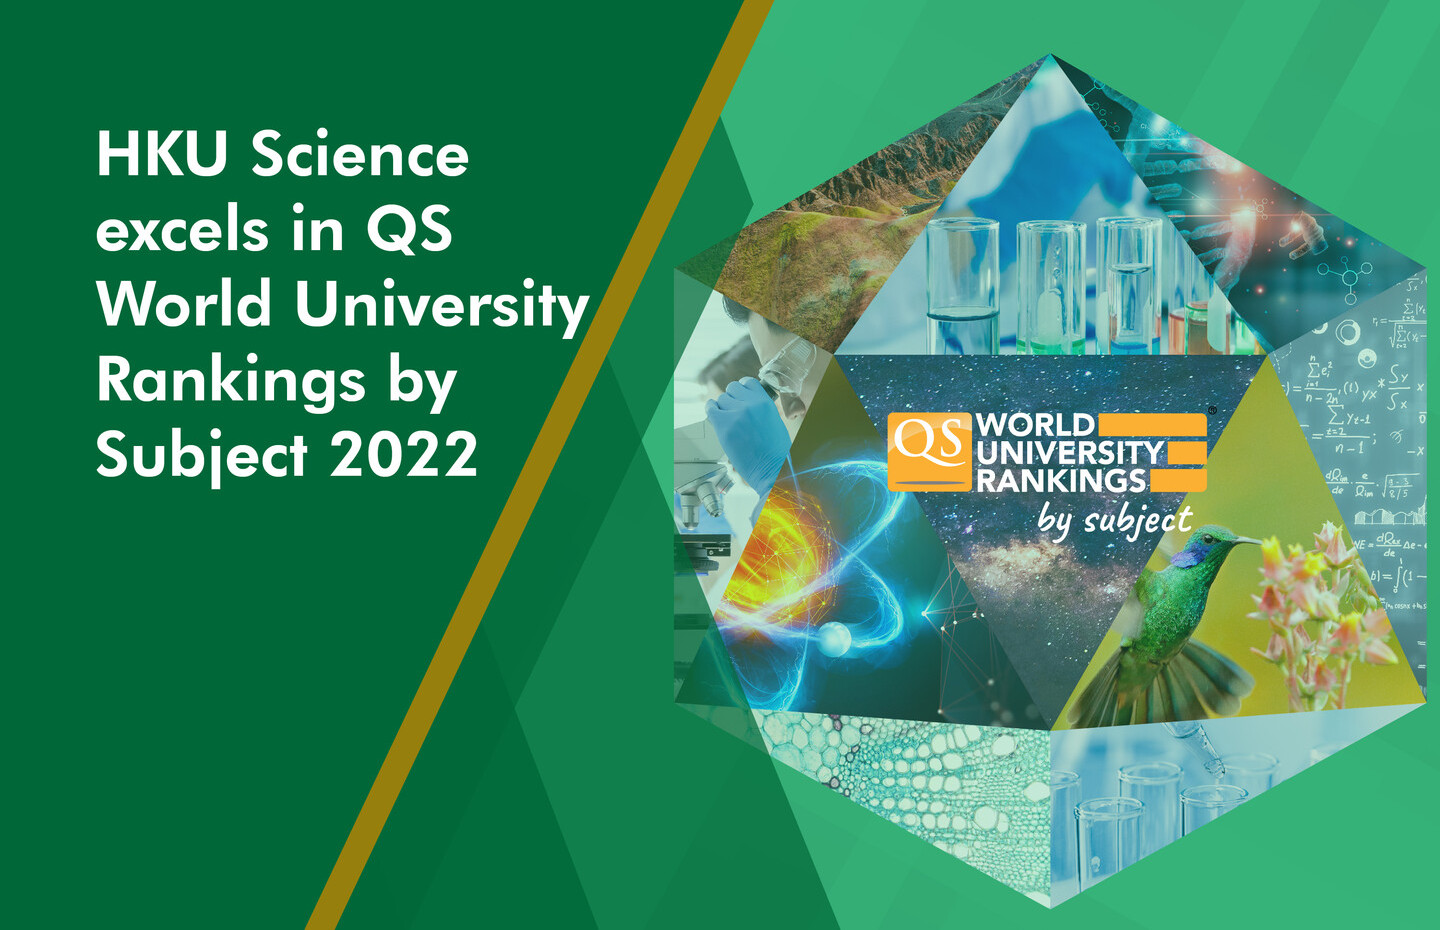 HKU Science excels in QS World University Rankings by Subject 2022